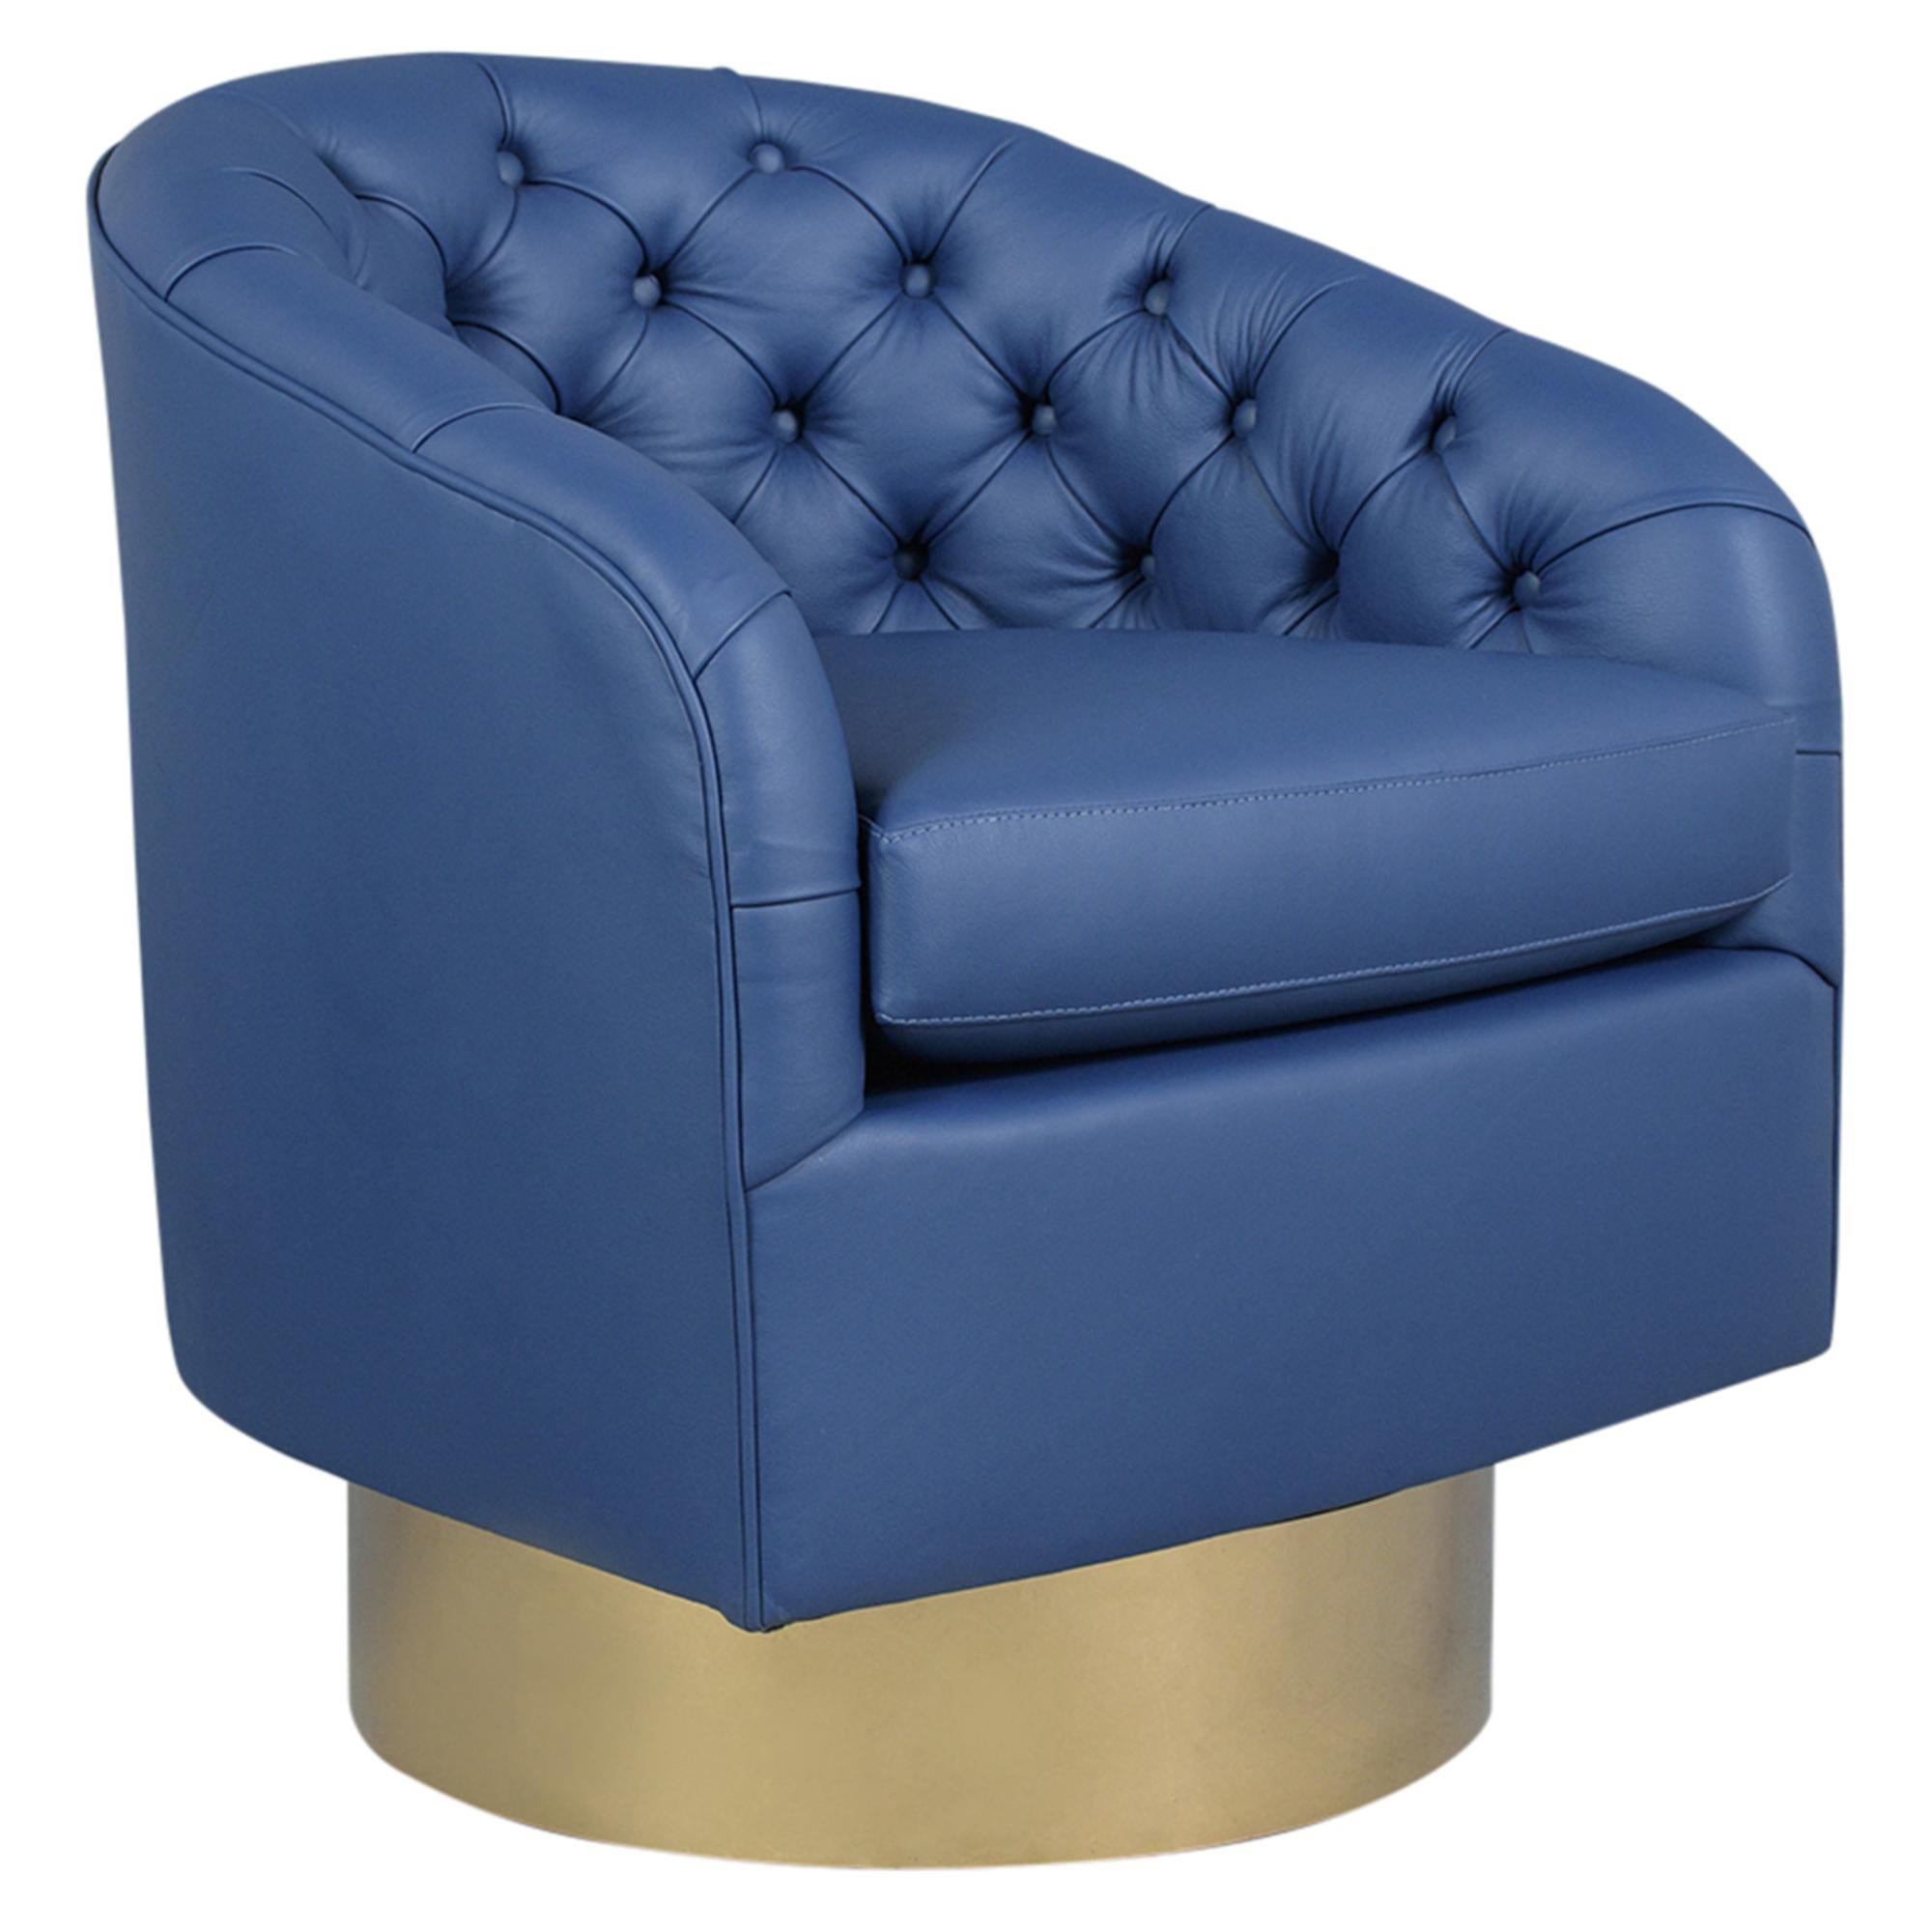 Immerse yourself in the elegance of mid-century modern design with our pair of vintage brass swivel lounge chairs, inspired by the iconic Milo Baughman. These chairs have been meticulously reupholstered in sumptuous blue leather by our team of